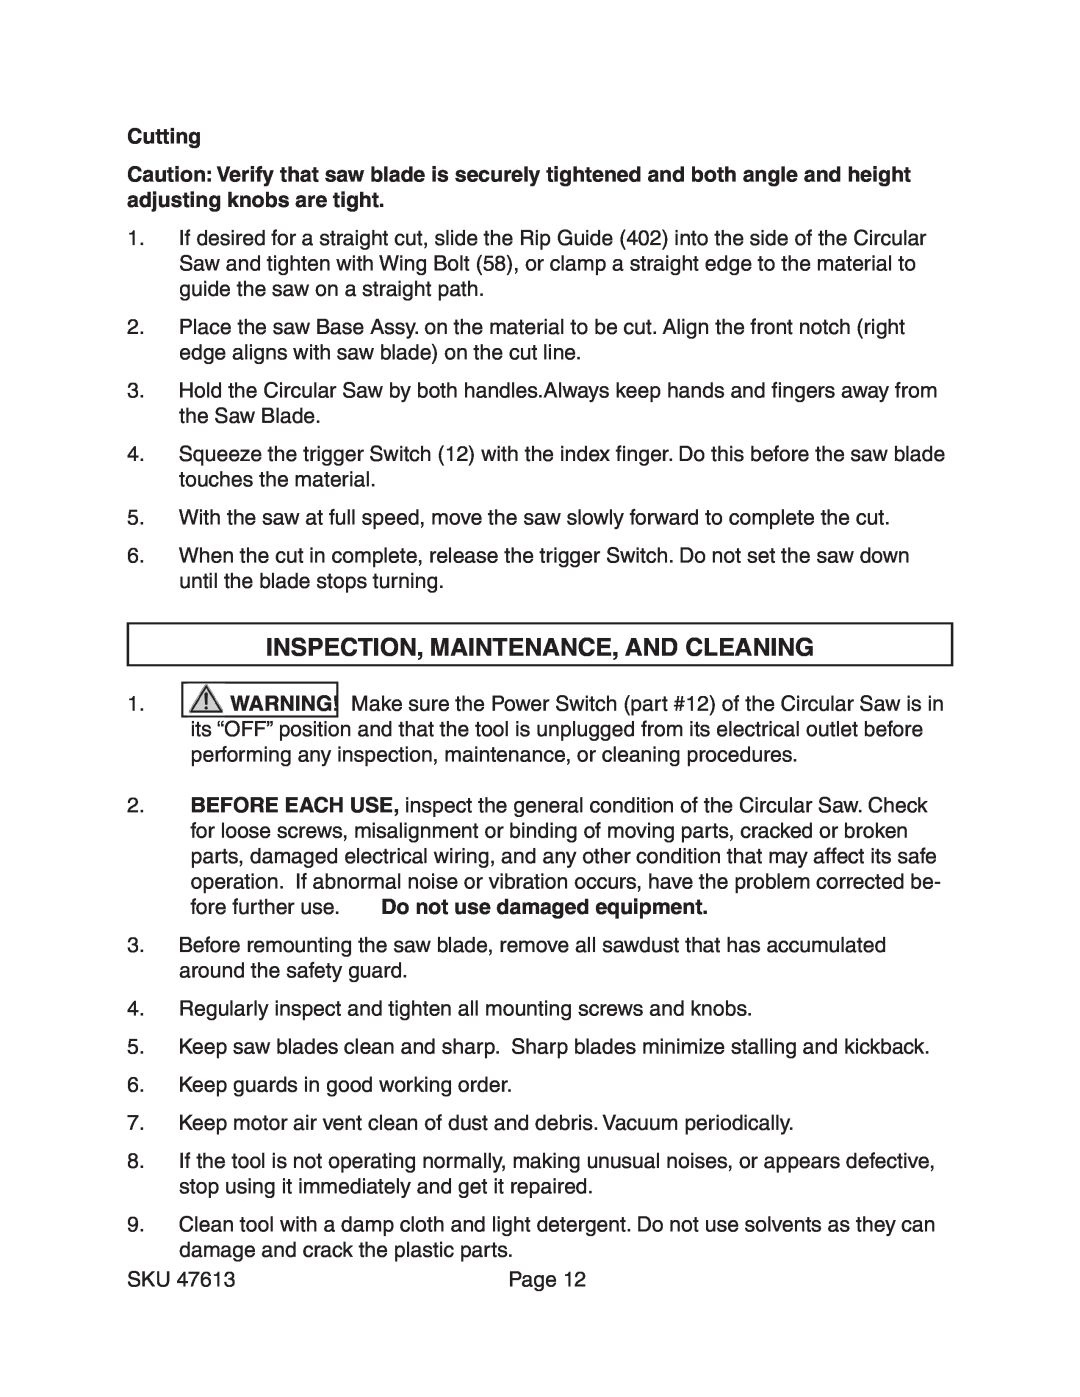 Harbor Freight Tools 47613 operating instructions Inspection, Maintenance, And Cleaning, Cutting 